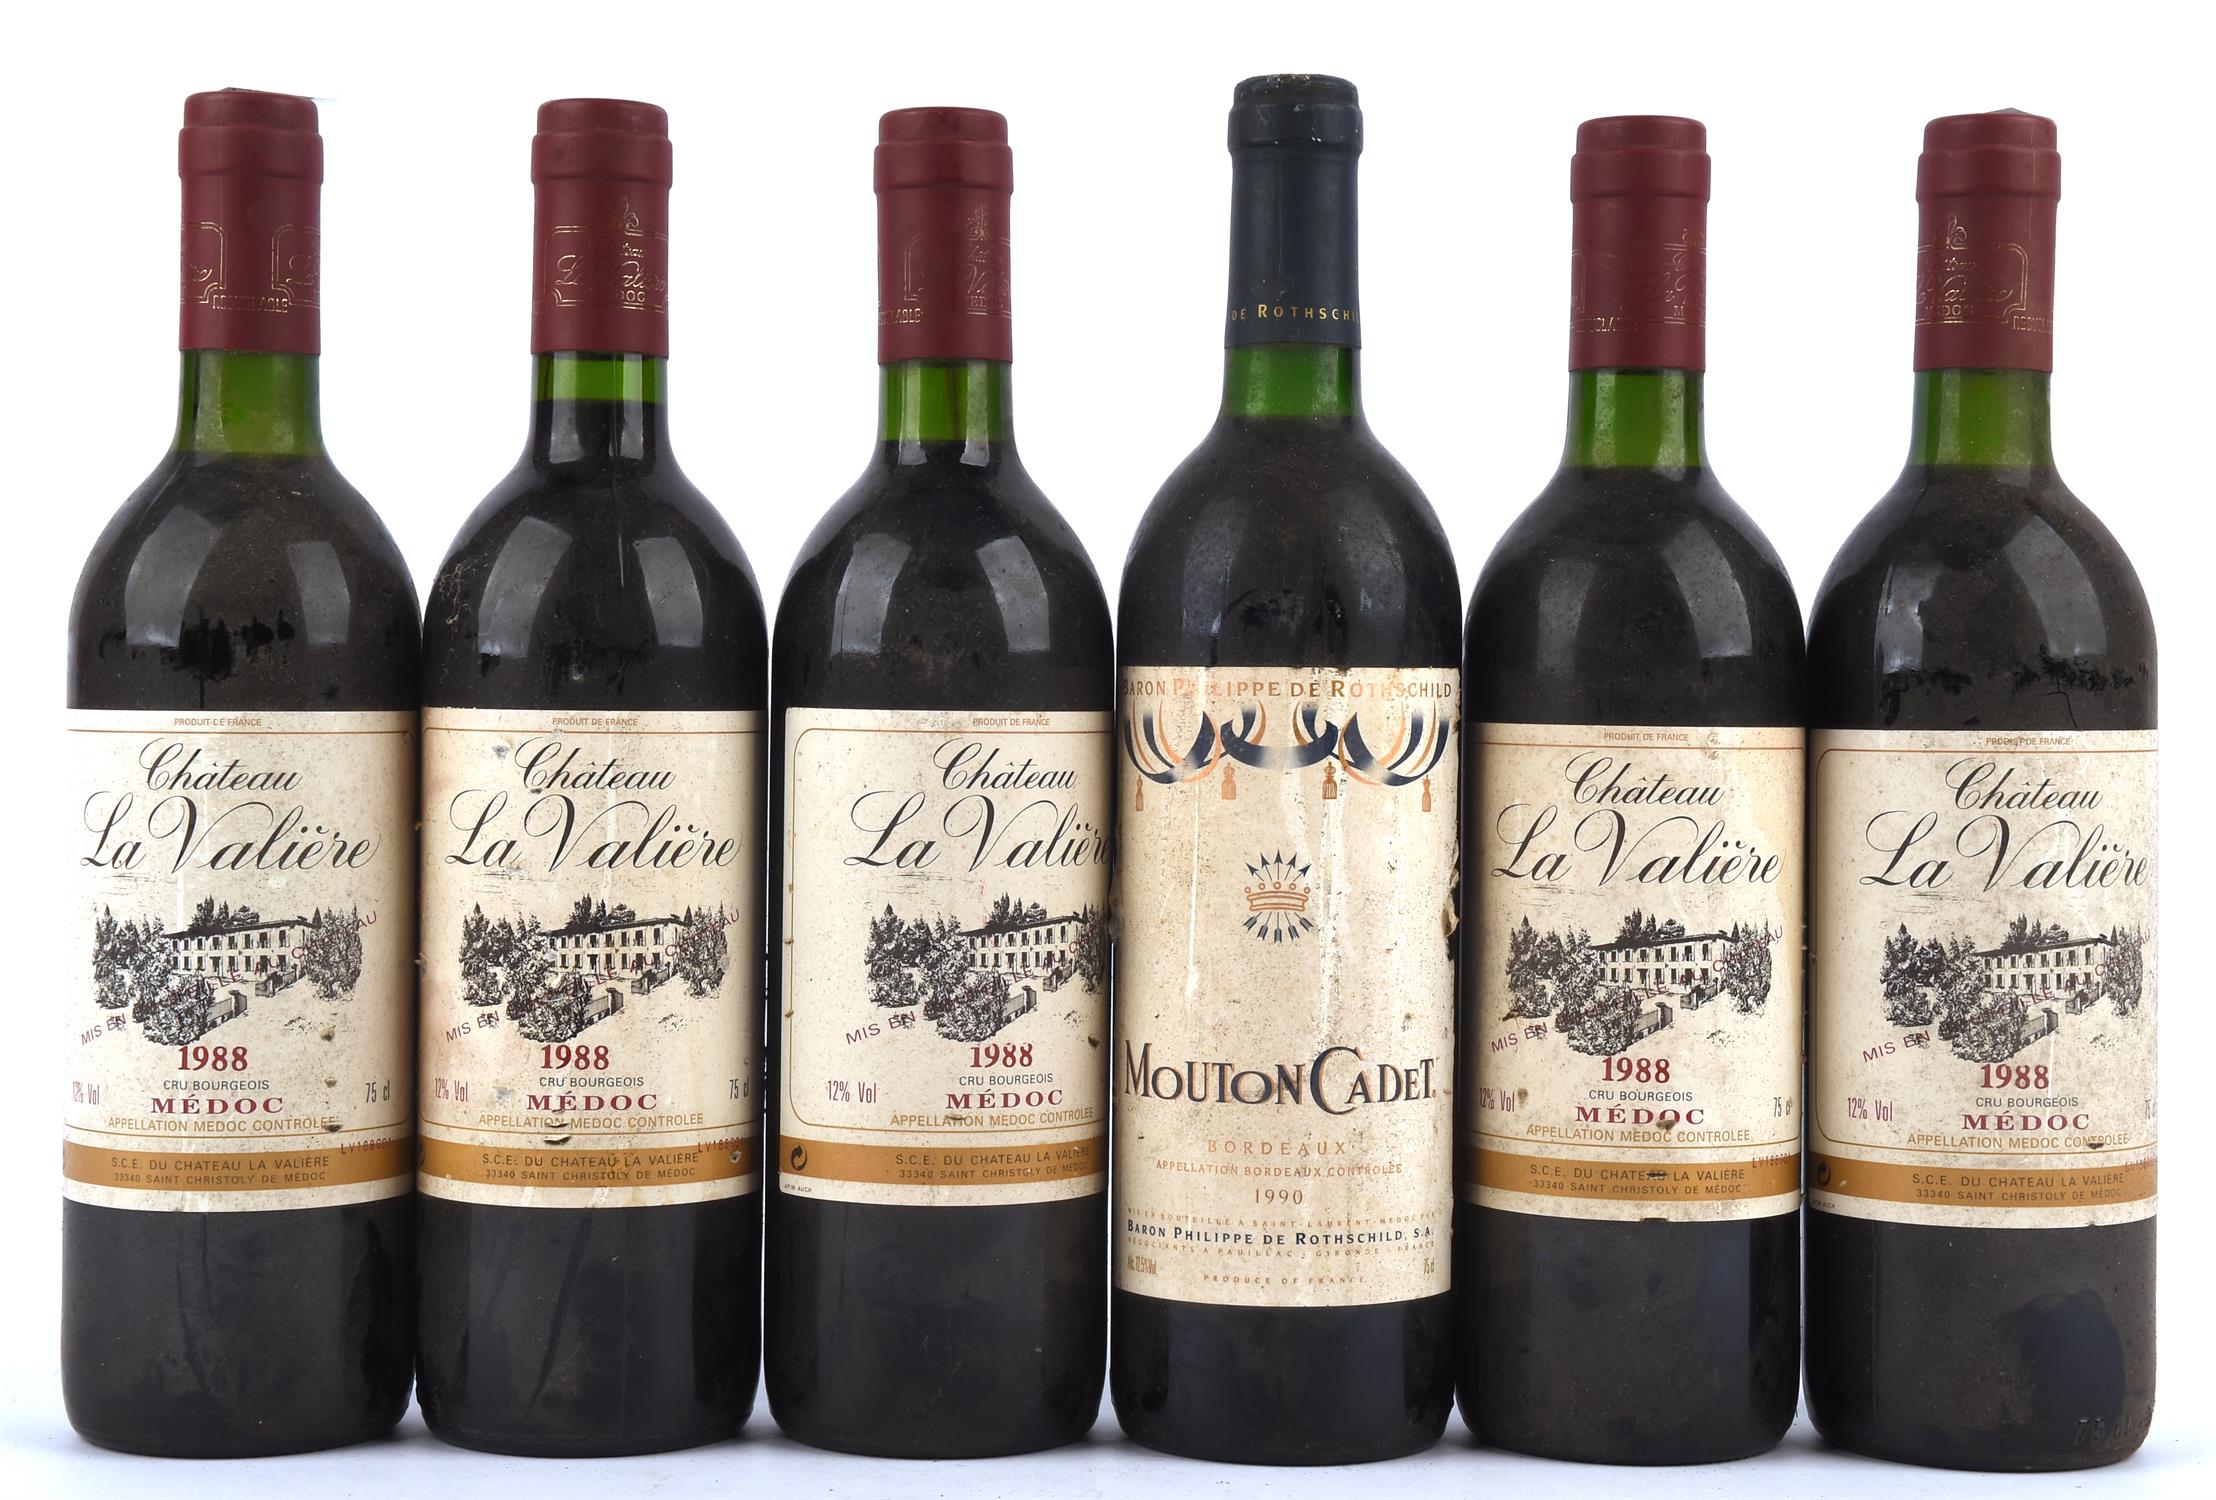 Bordeaux wines, Chateau Le Valiere, Medoc 1988, 5 bottles and Baron Phillippe 1990, one bottle (6)